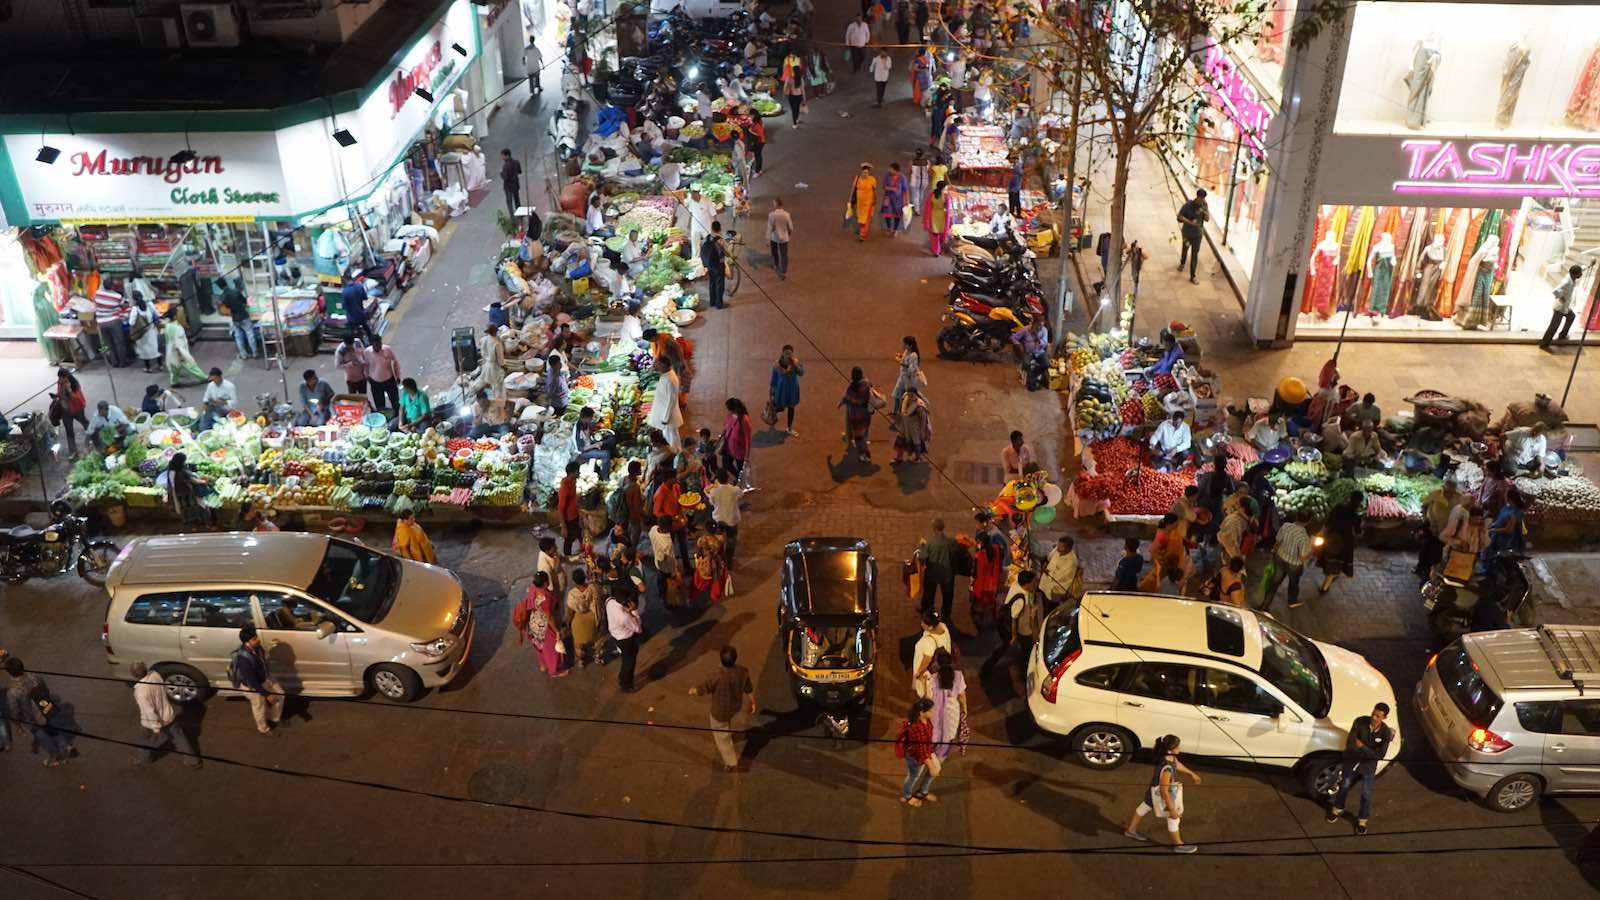 My hostel in Mumbai had a rooftop patio that overlooked a busy side street full of shops and merchants. It was extremely lively and I spent a lot of time hanging out on the rooftop just people watching, occasionally going down to buy an ice cream bar from one of the shops.